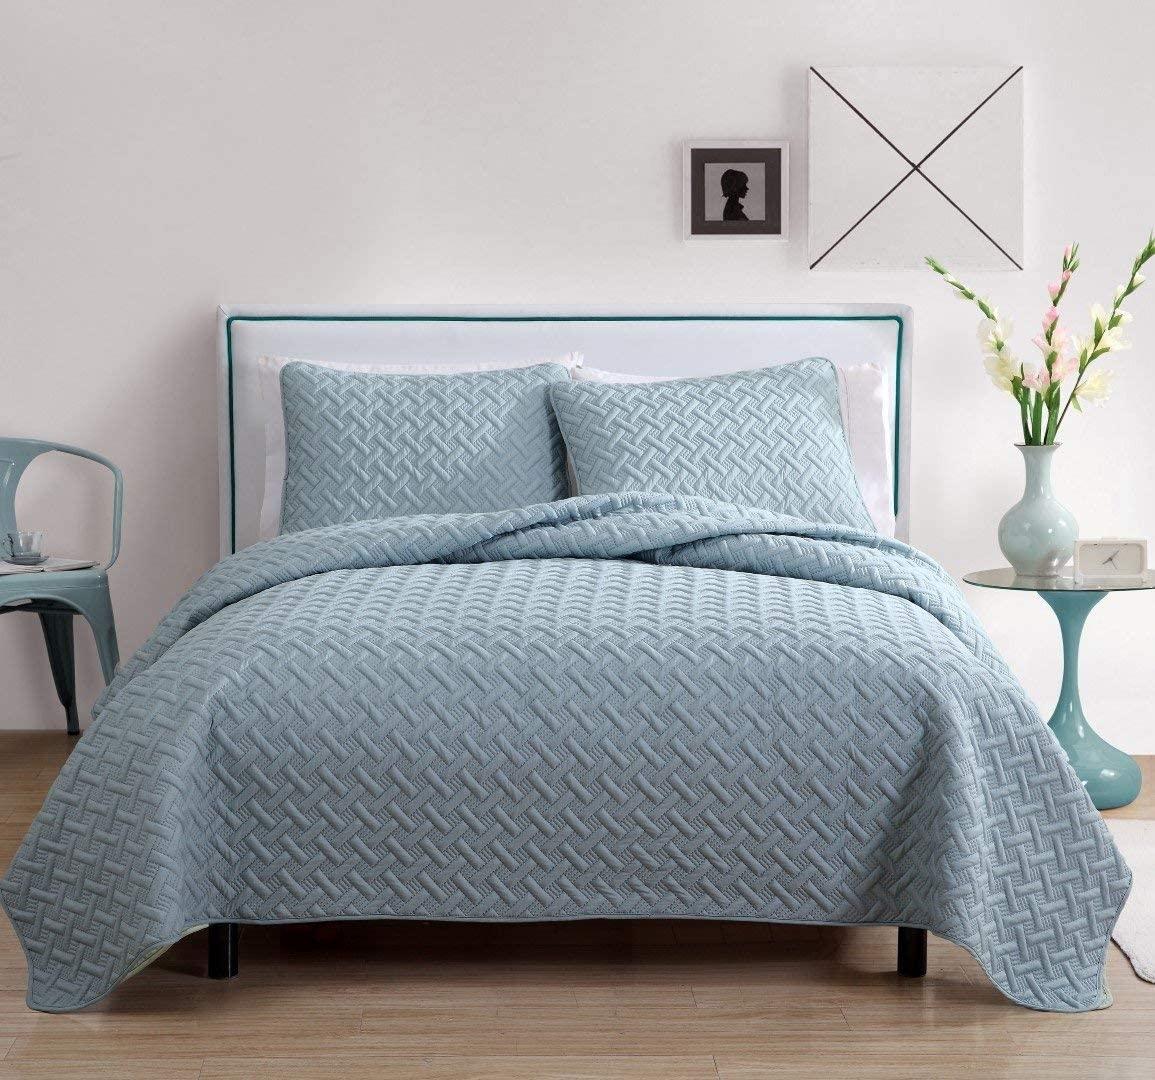 VCNY Home Nina Bedding Collection Luxury 3-Piece Set for $21.99